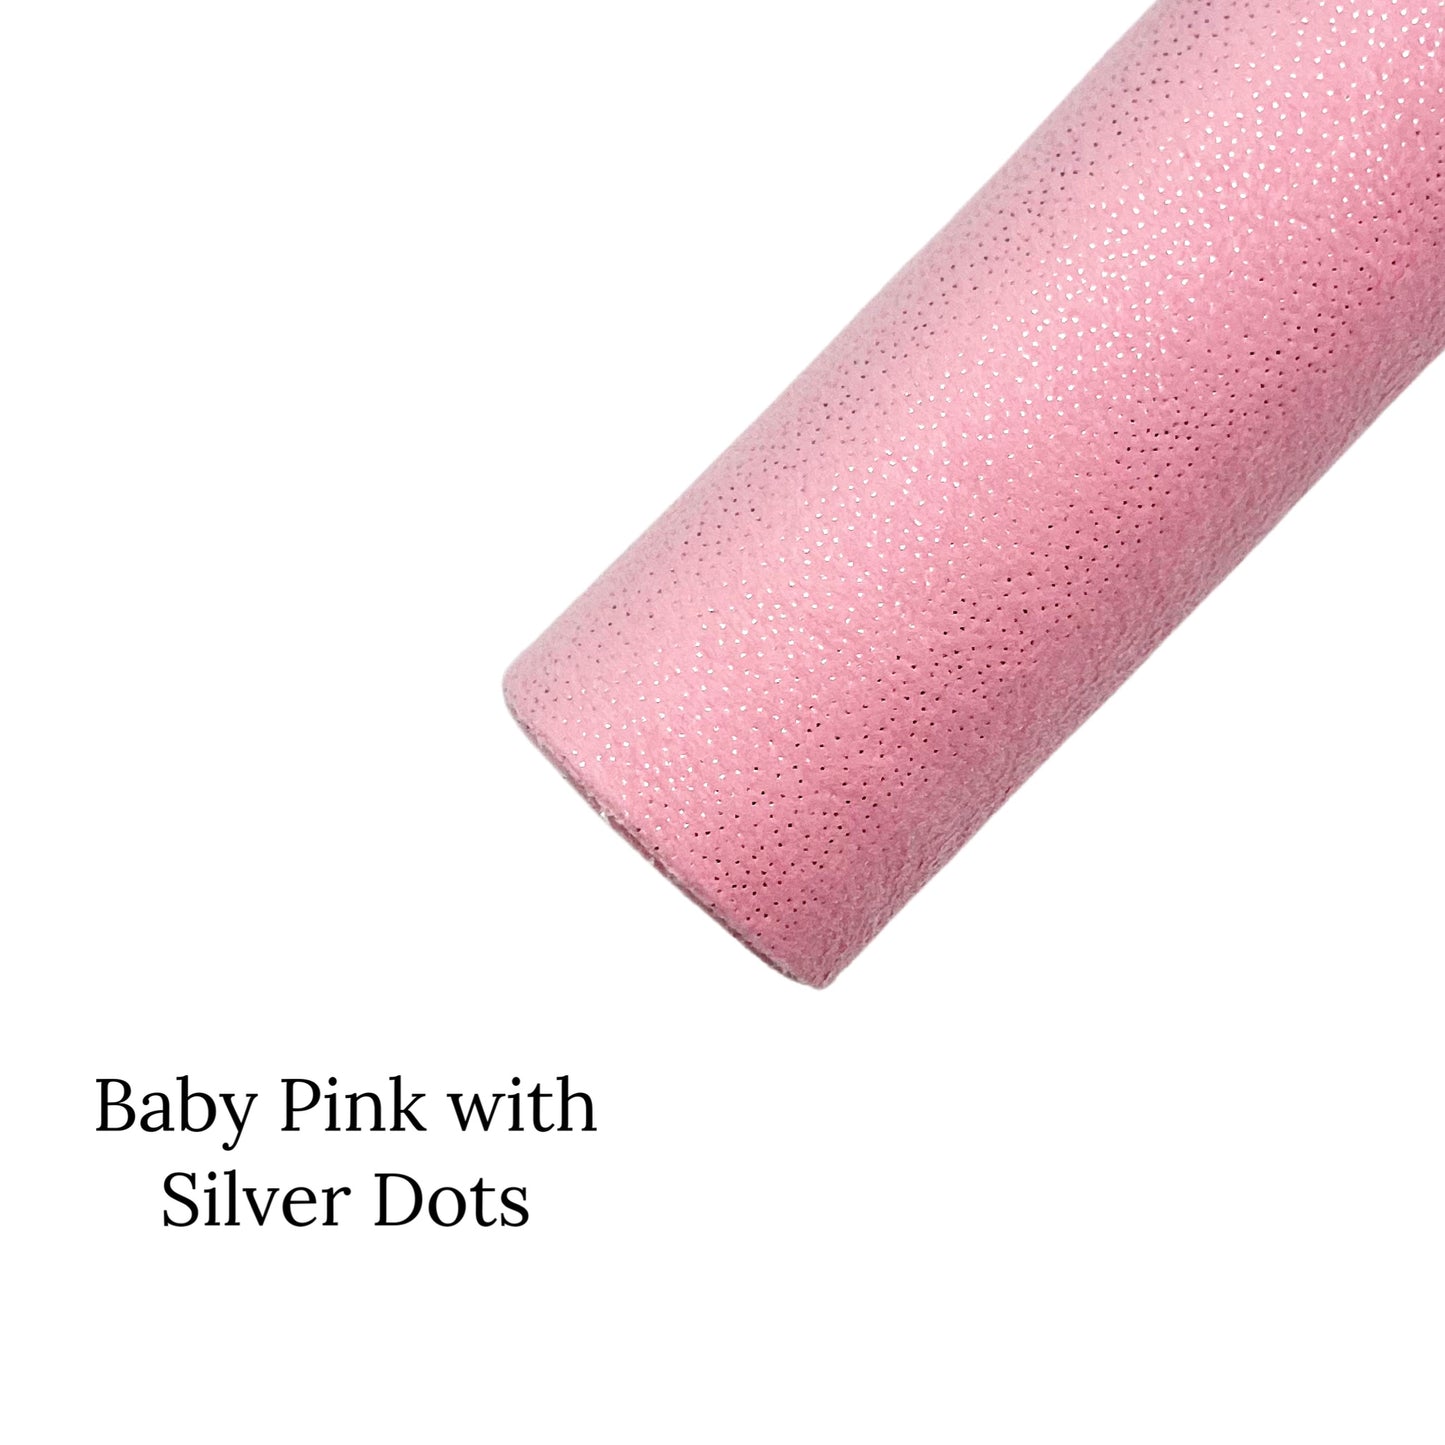 Rolled baby pink faux leather sheet on silver dots